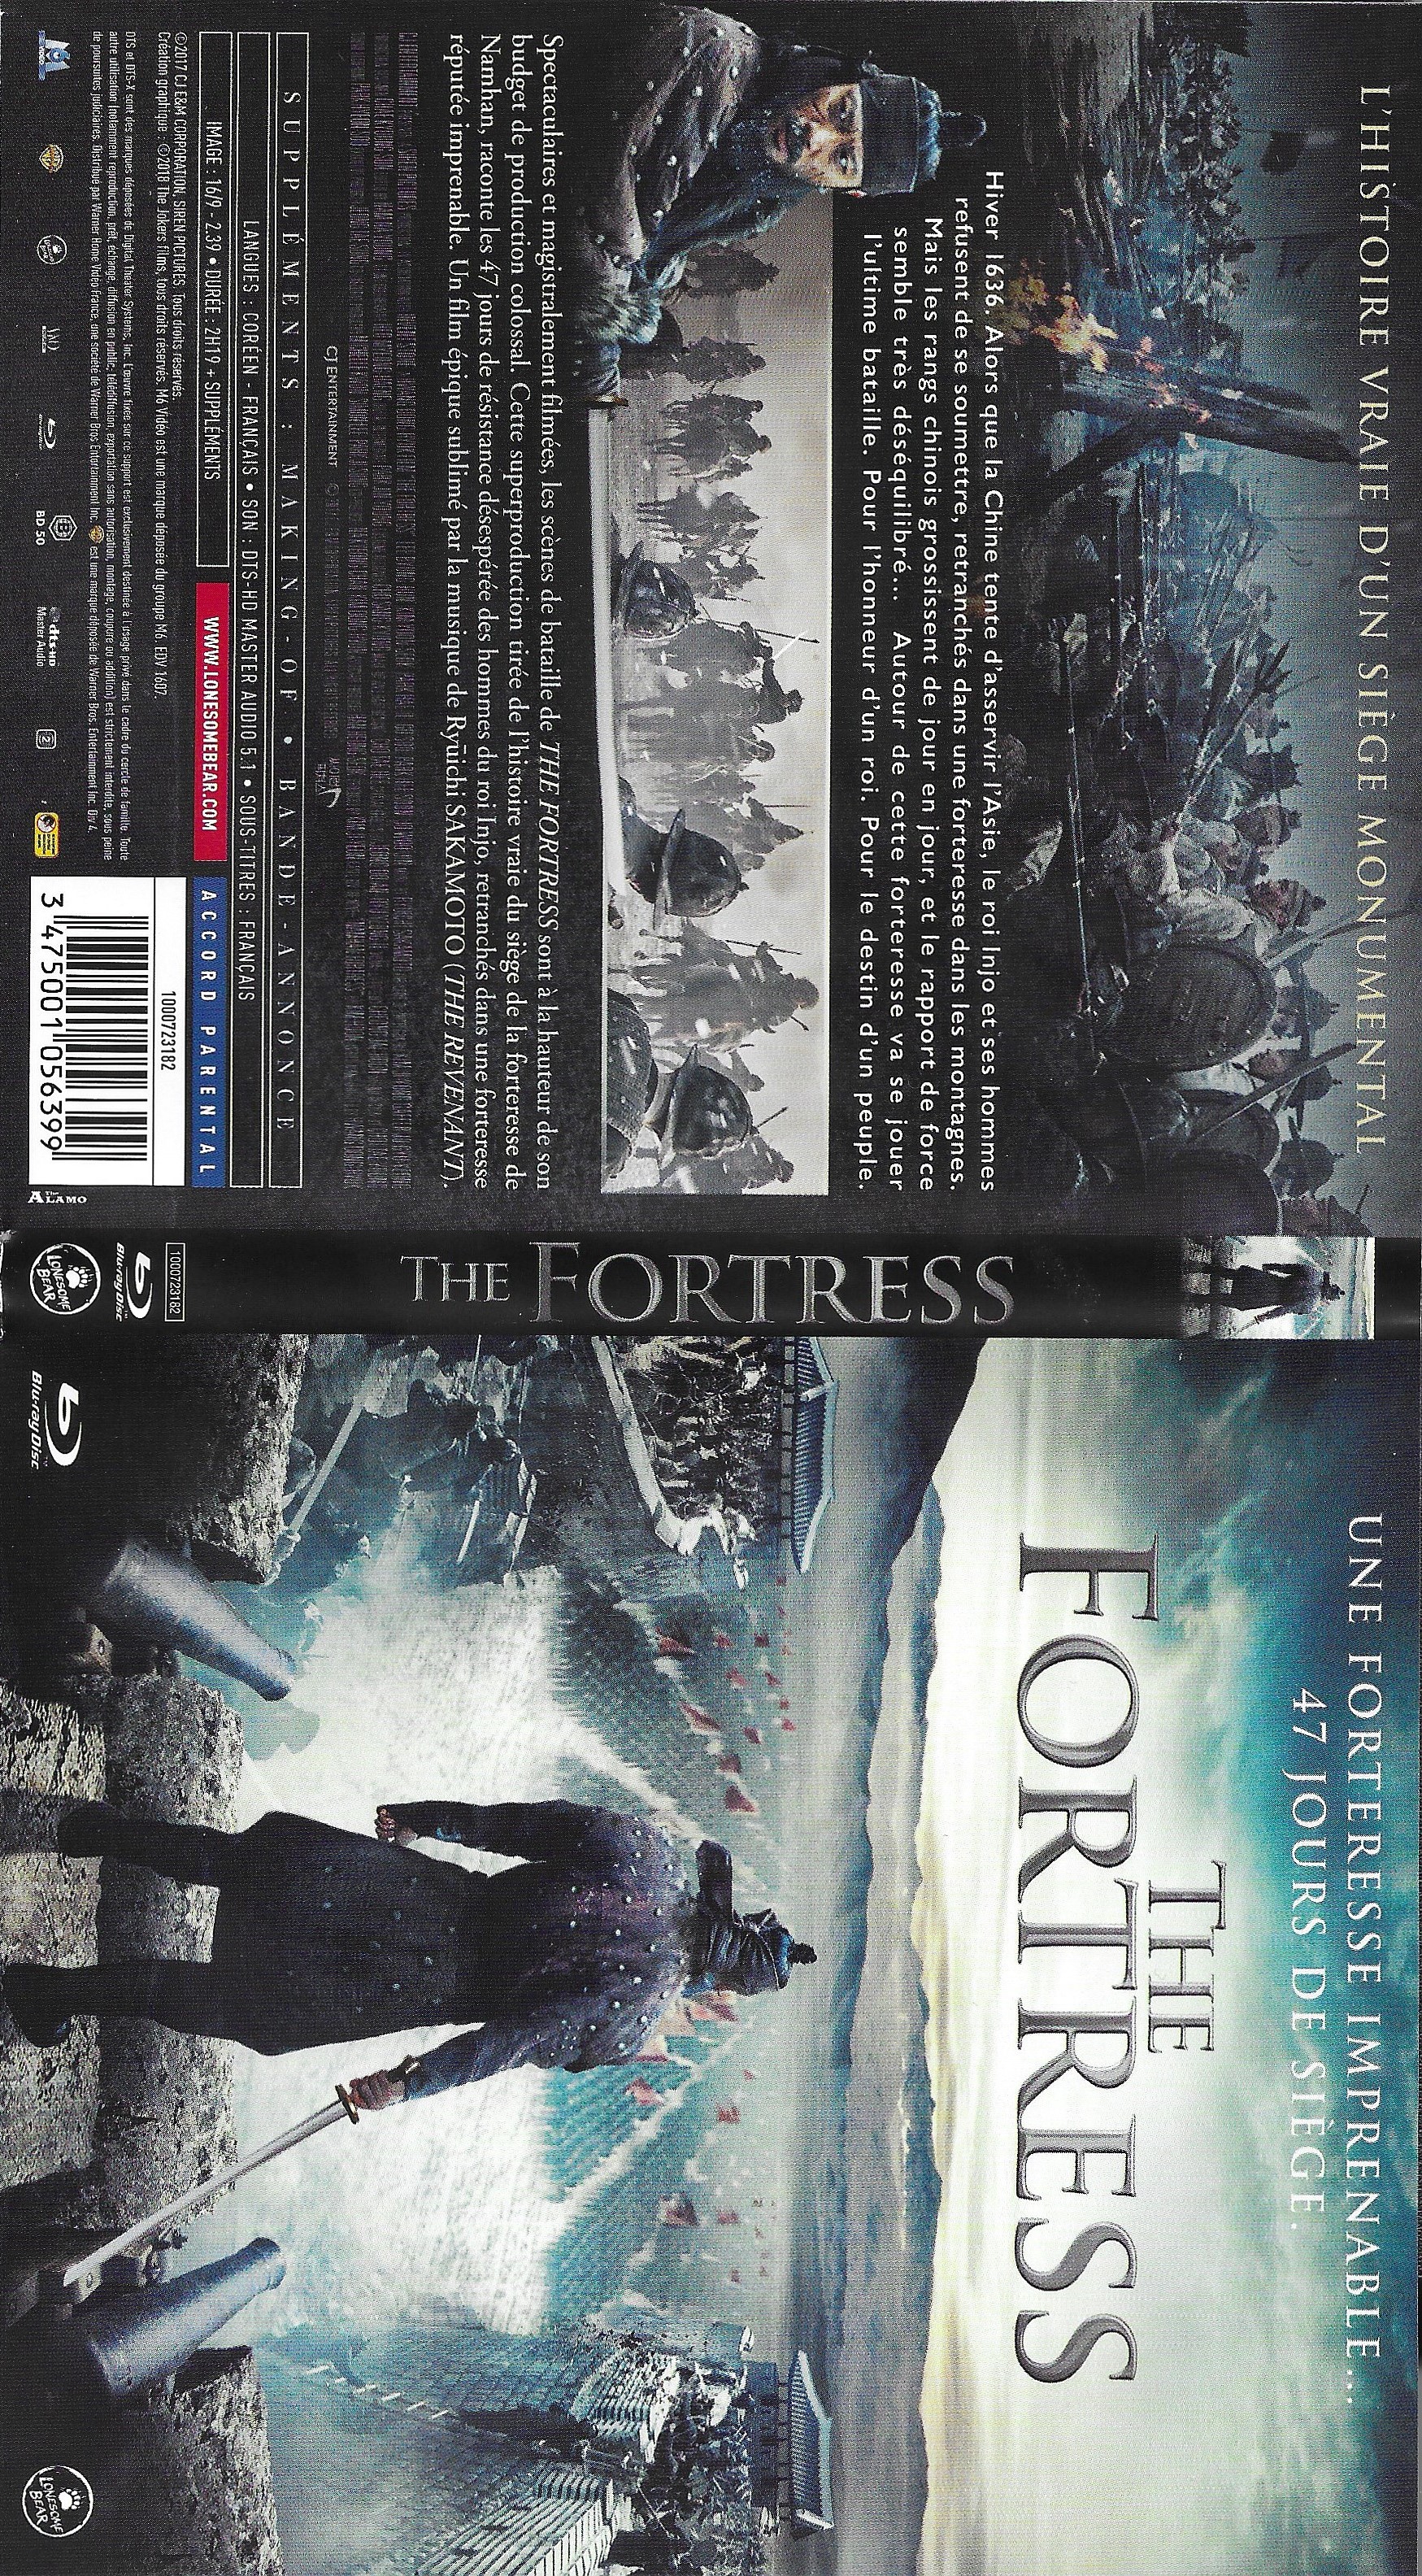 Jaquette DVD The fortress (BLU-RAY)